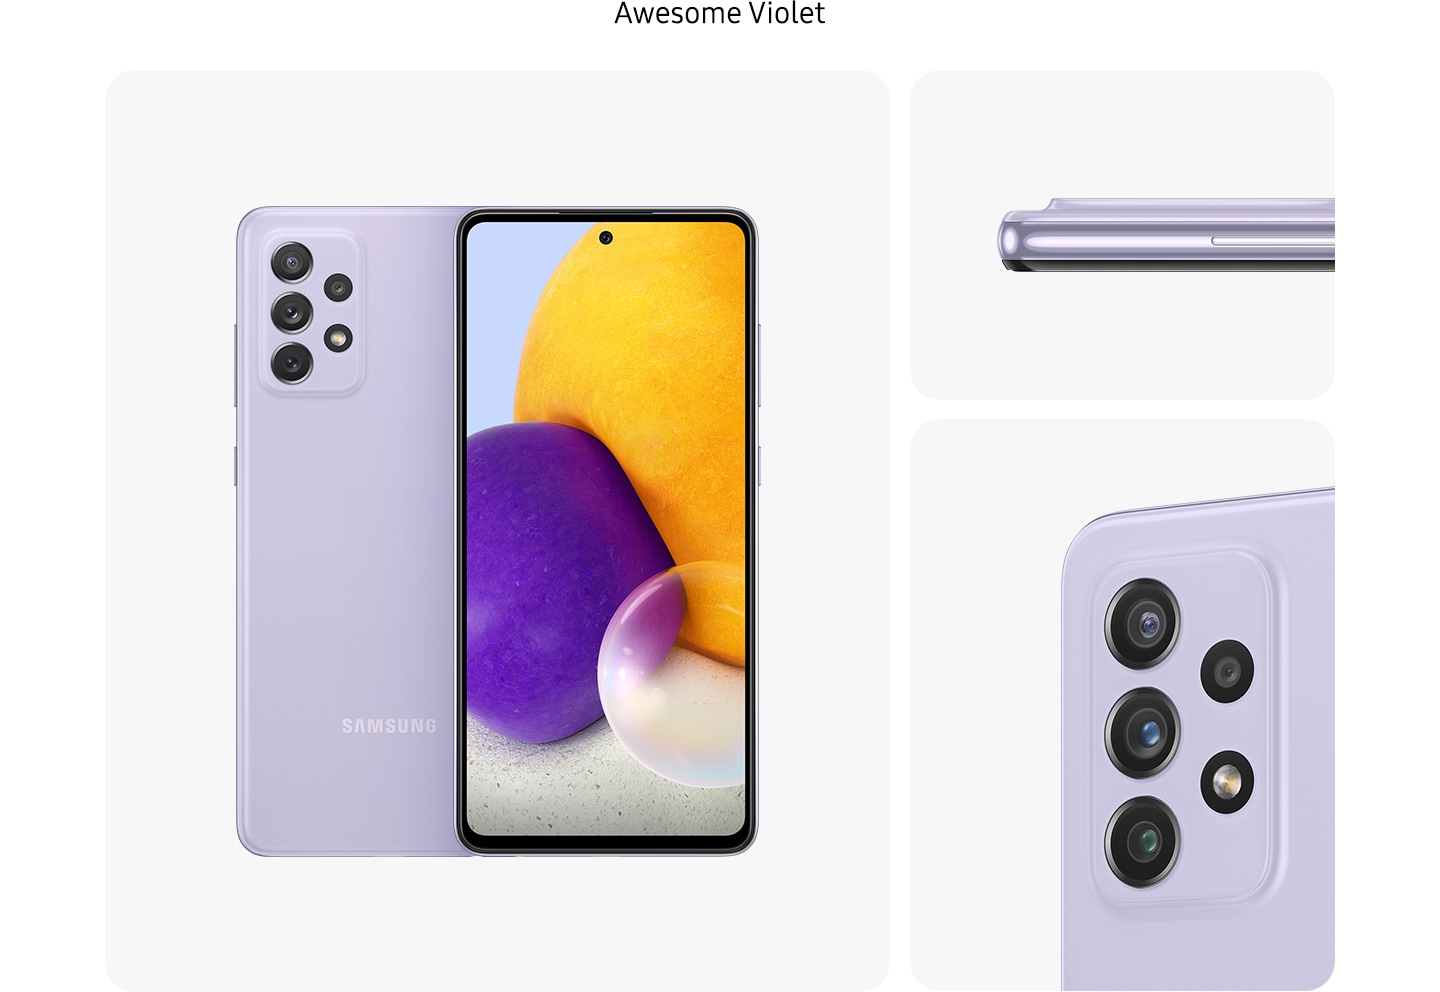 Galaxy A72, in AWESOME purple, appears displayed from multiple angles to show the design: from the back, front, sides and focus on the rear camera.